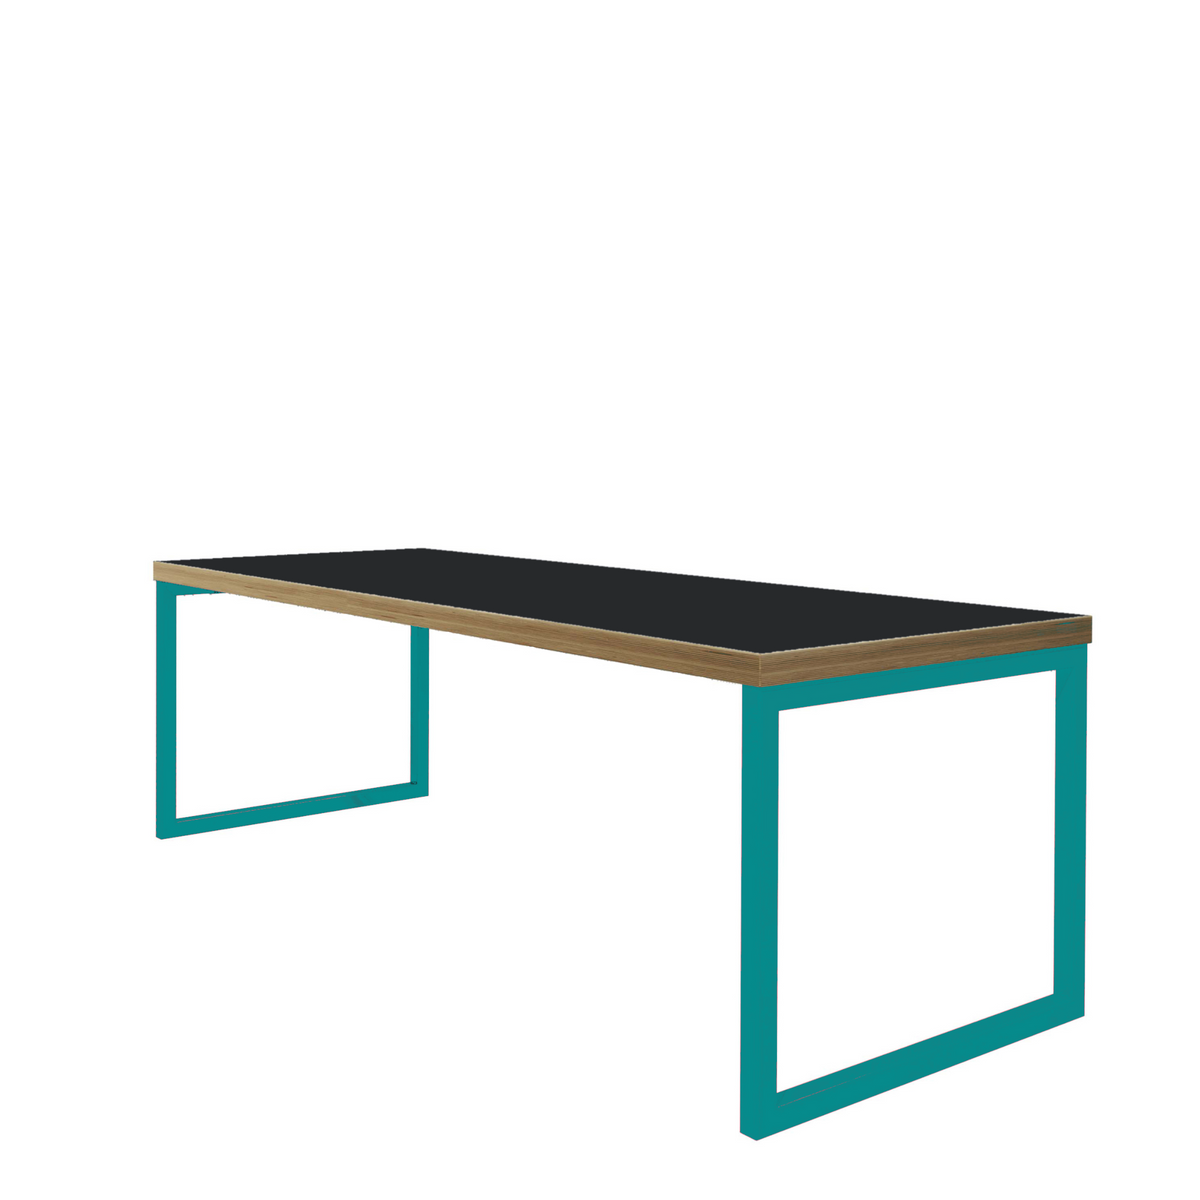 ORN Axiom Café Bench Table Black with Turquoise Blue 5018 Frame